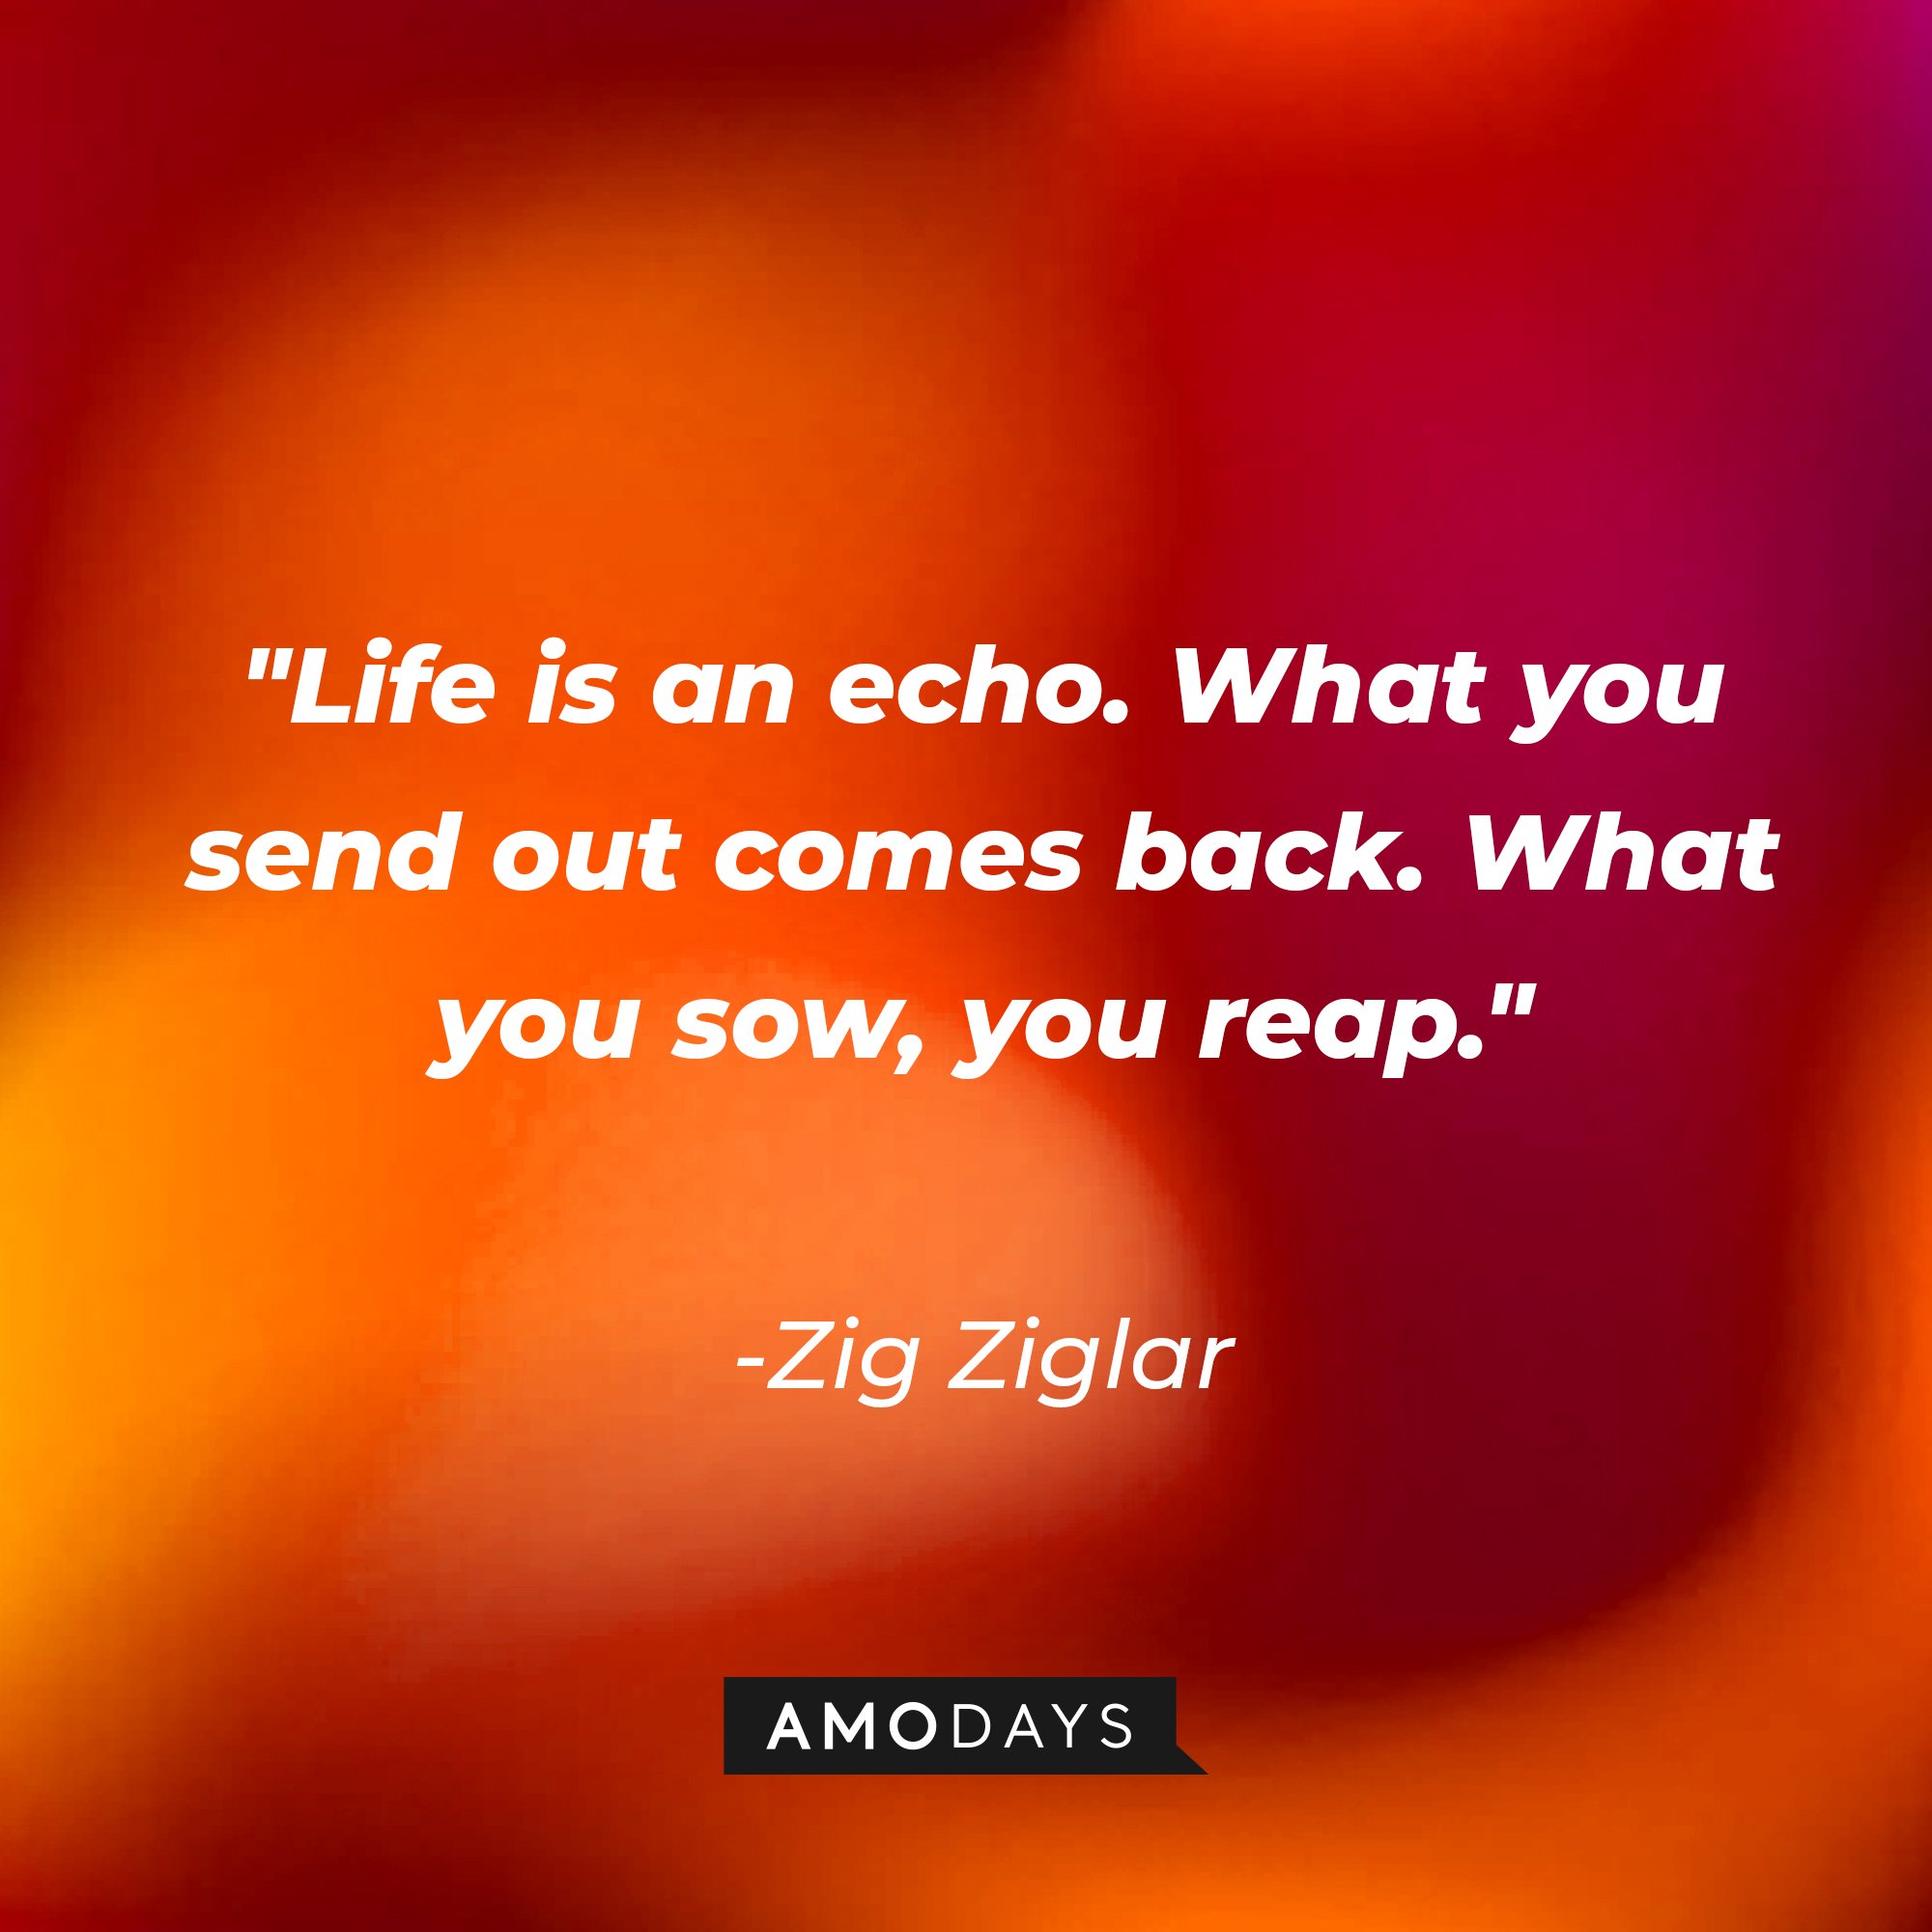 Zig Ziglar’s quote: "Life is an echo. What you send out comes back. What you sow, you reap." | Image: AmoDays